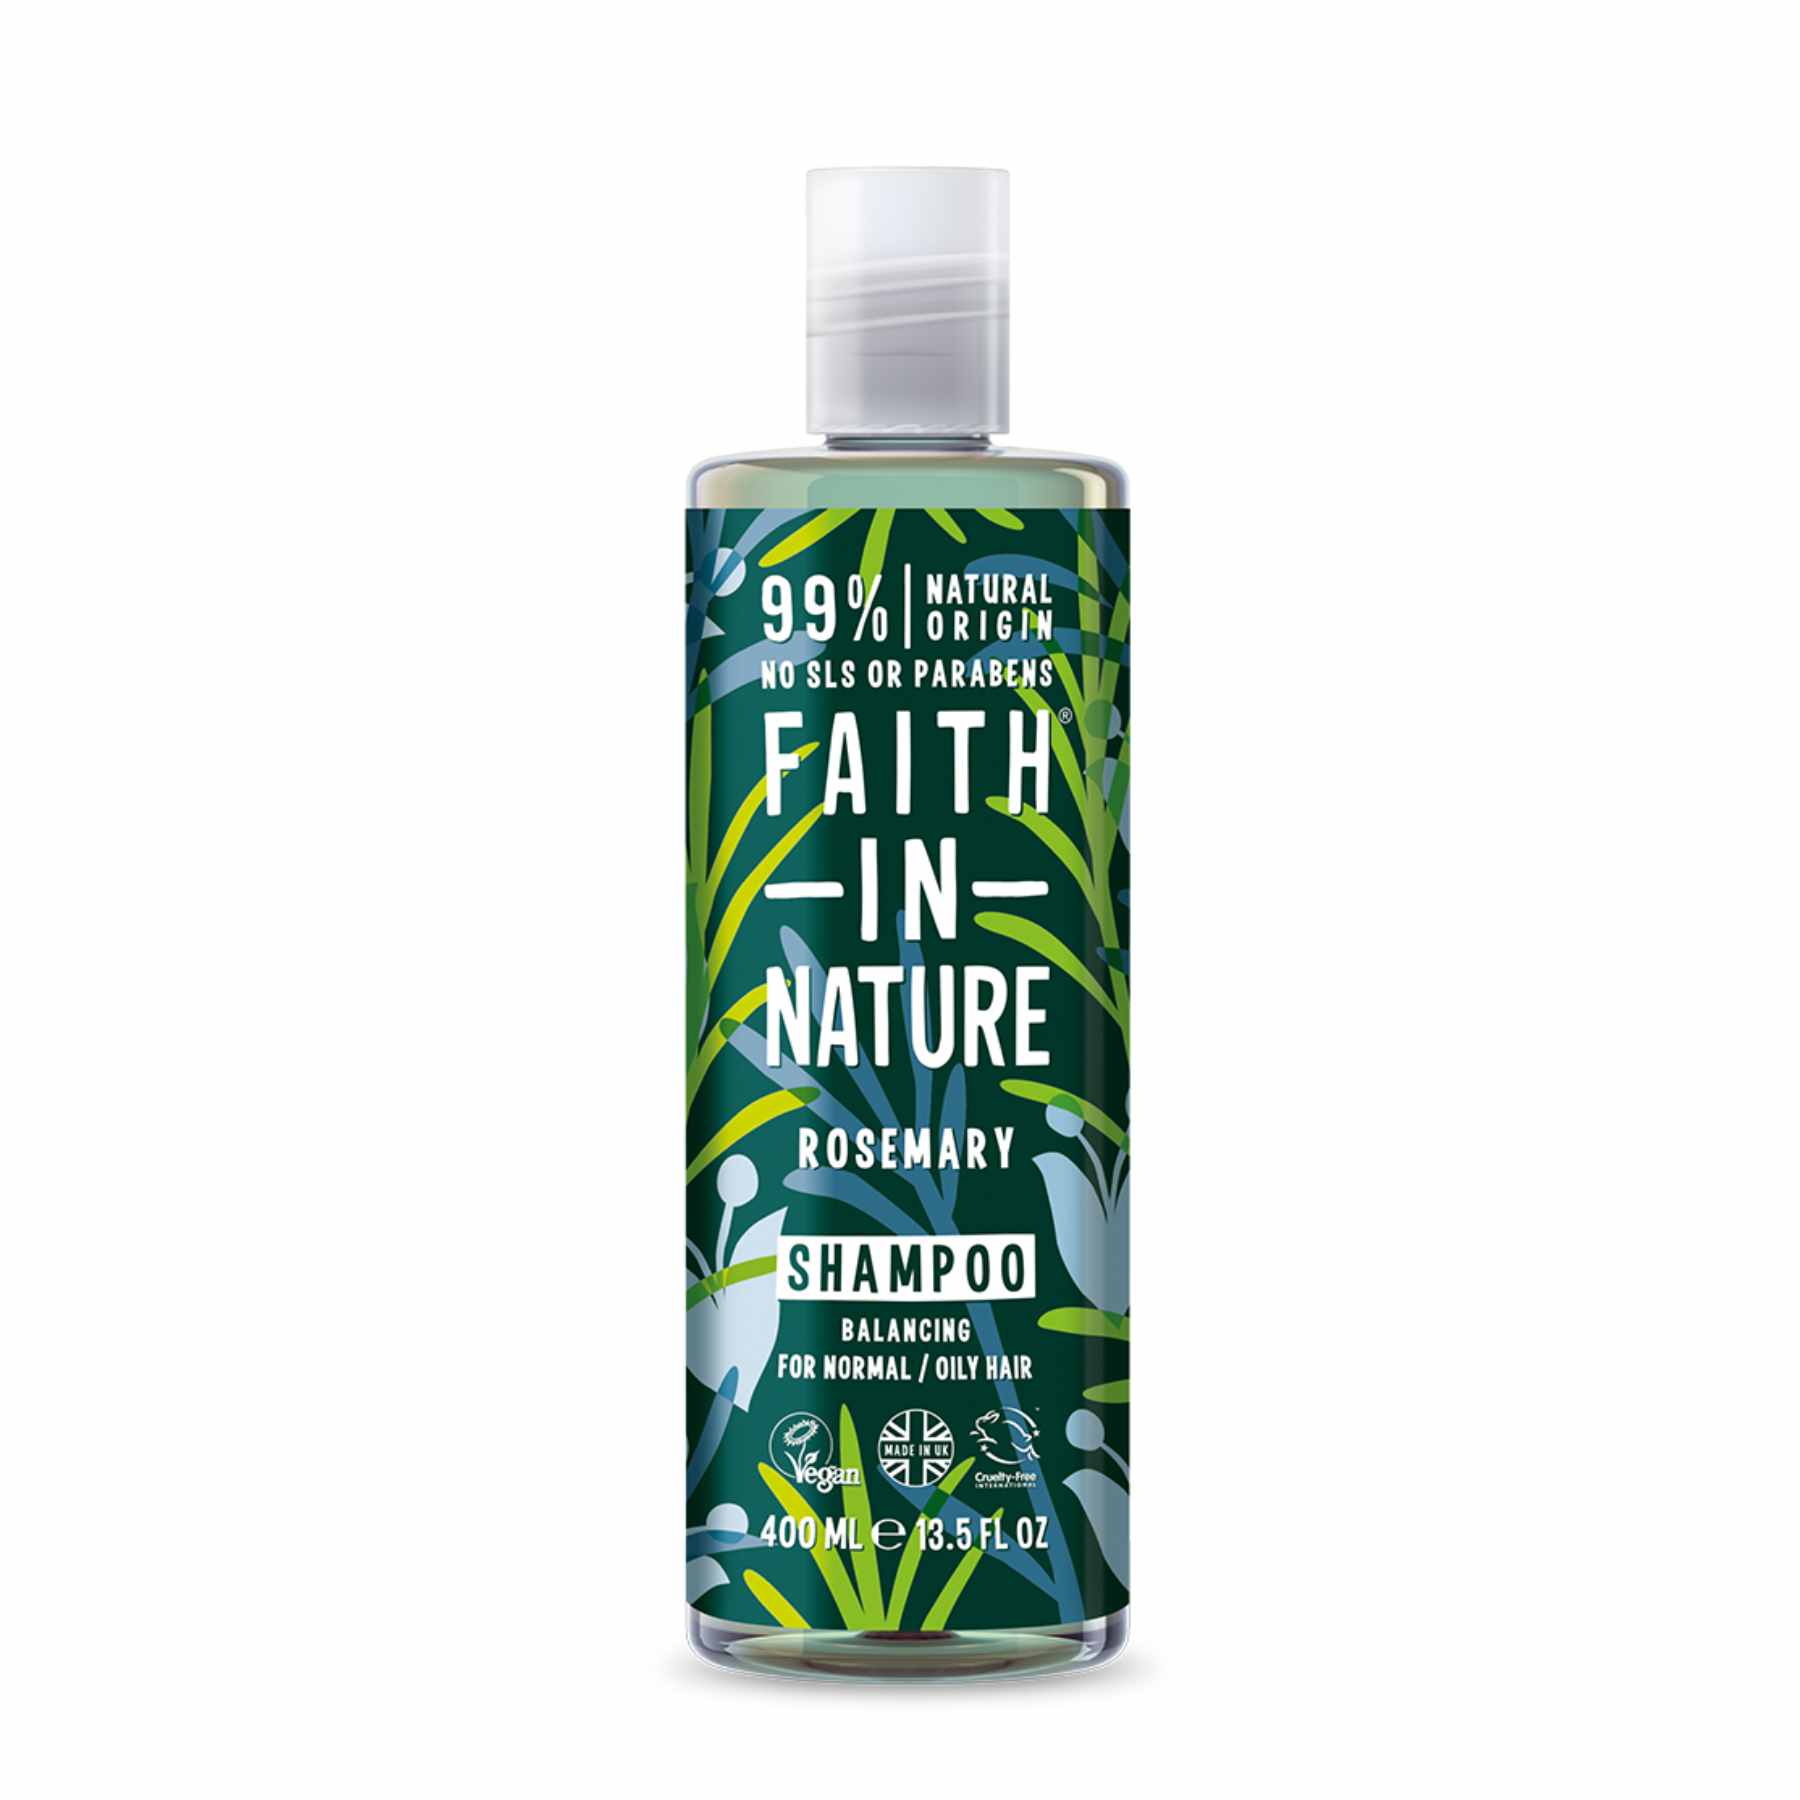  Shop Faith in Nature Rosemary Shampoo 400 ml | Volumizing on Sublime Life. Balancing Shampoo that Boosts Volume and Growth